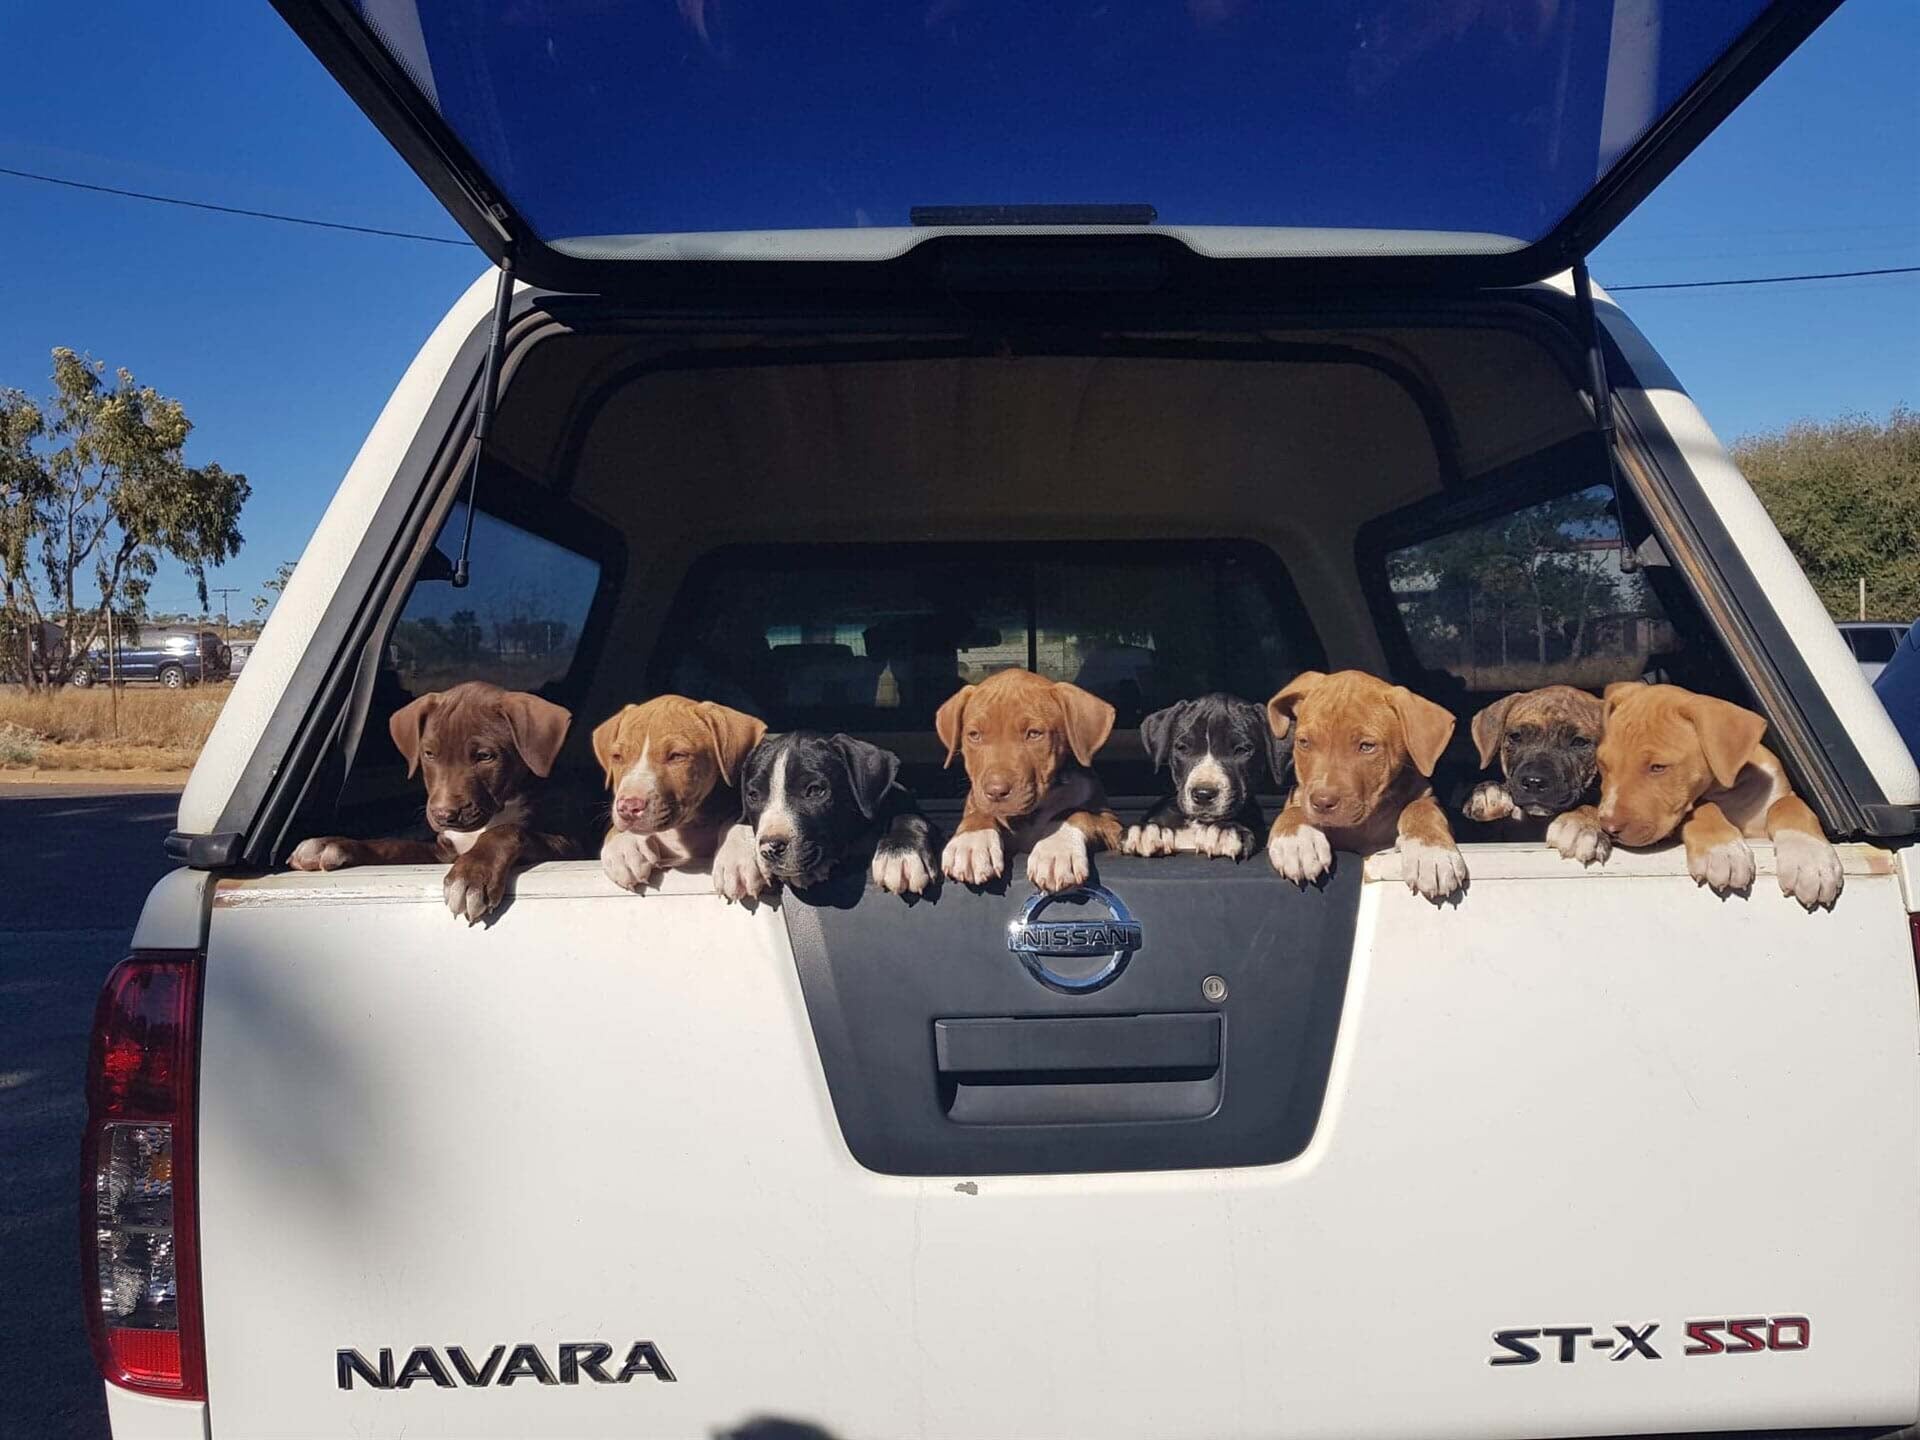 Puppies At The Rear Side Of the Car